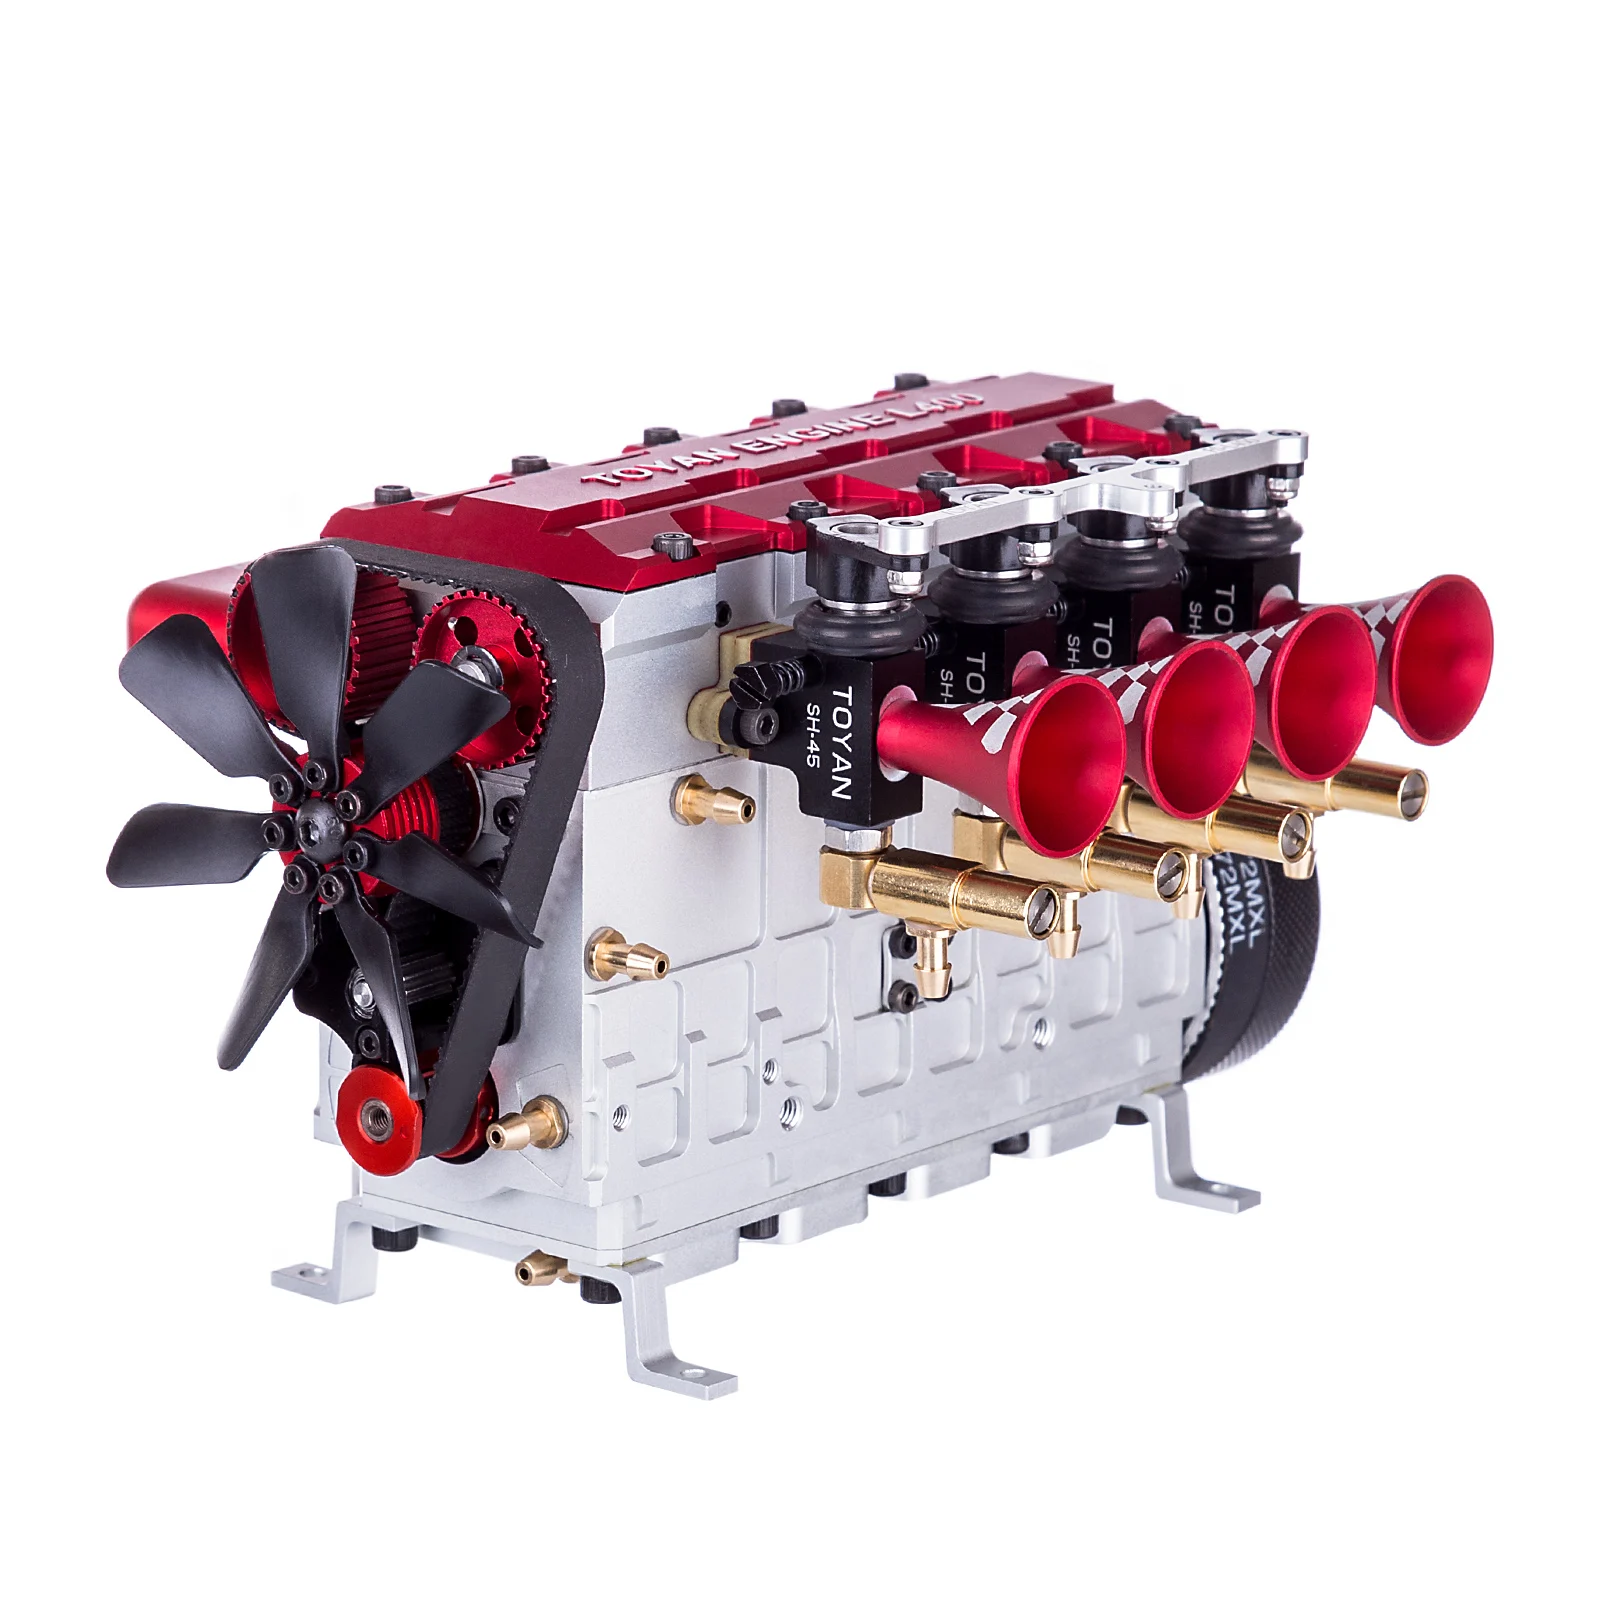 TOYAN FS-L400 14cc Inline Four-Cylinder Four-Stroke Water-Cooled Nitro Engine Model Assembly Kit For 1:8 1:10 1:12 RC Car Ship